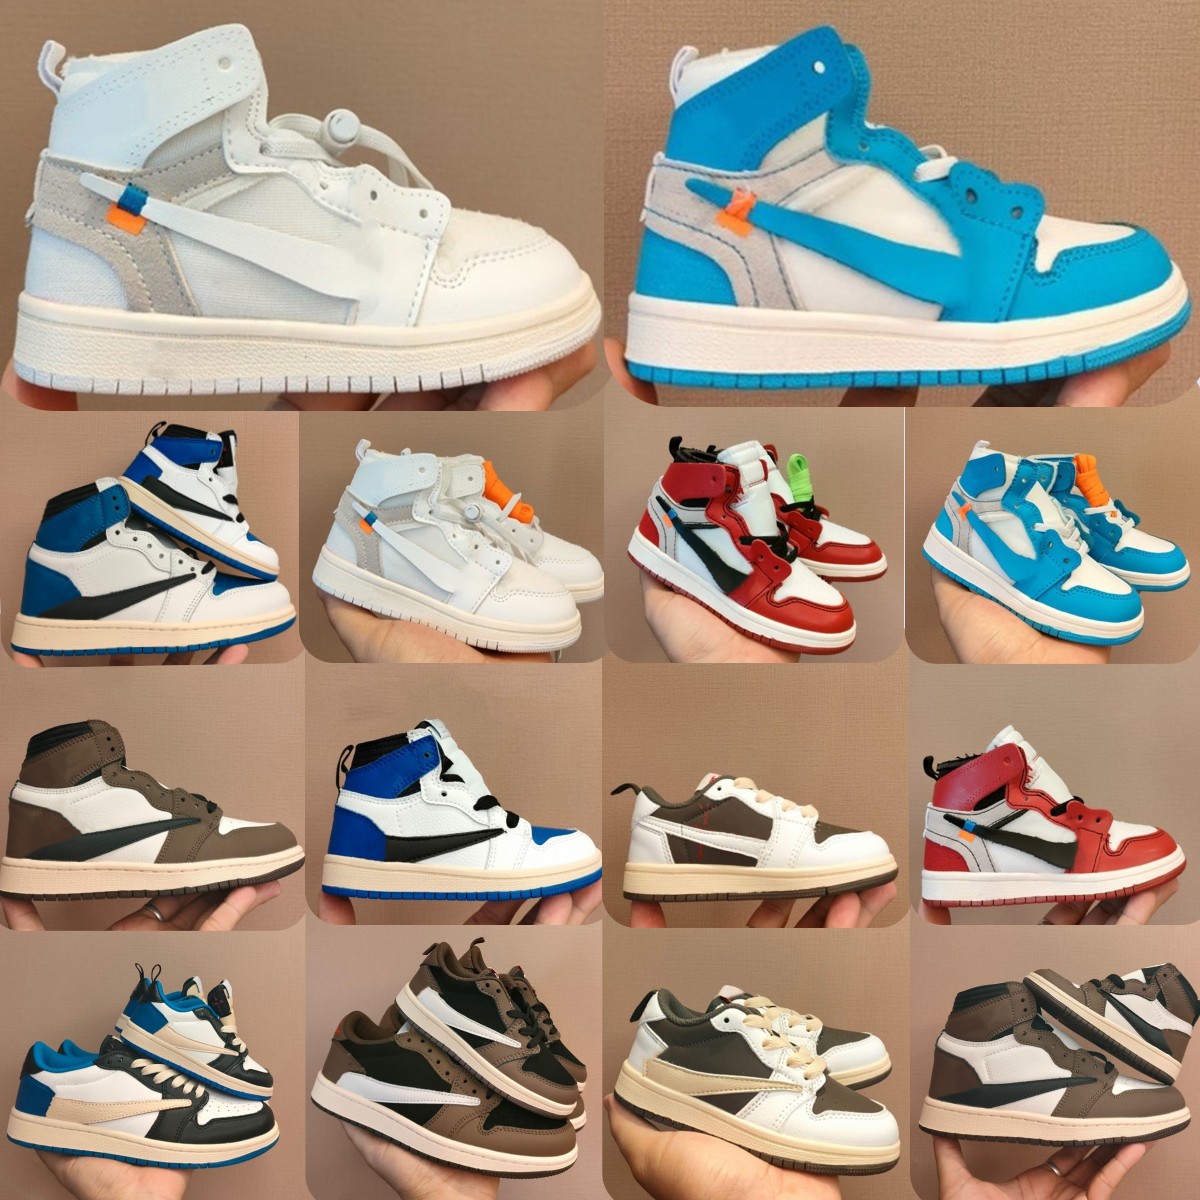 

Jumpman 1s kids shoes 1 low Basketball Shoe boys sneaker designer Pine Game Chicago mocha baby kid youth toddler infants trainers sports Athletic